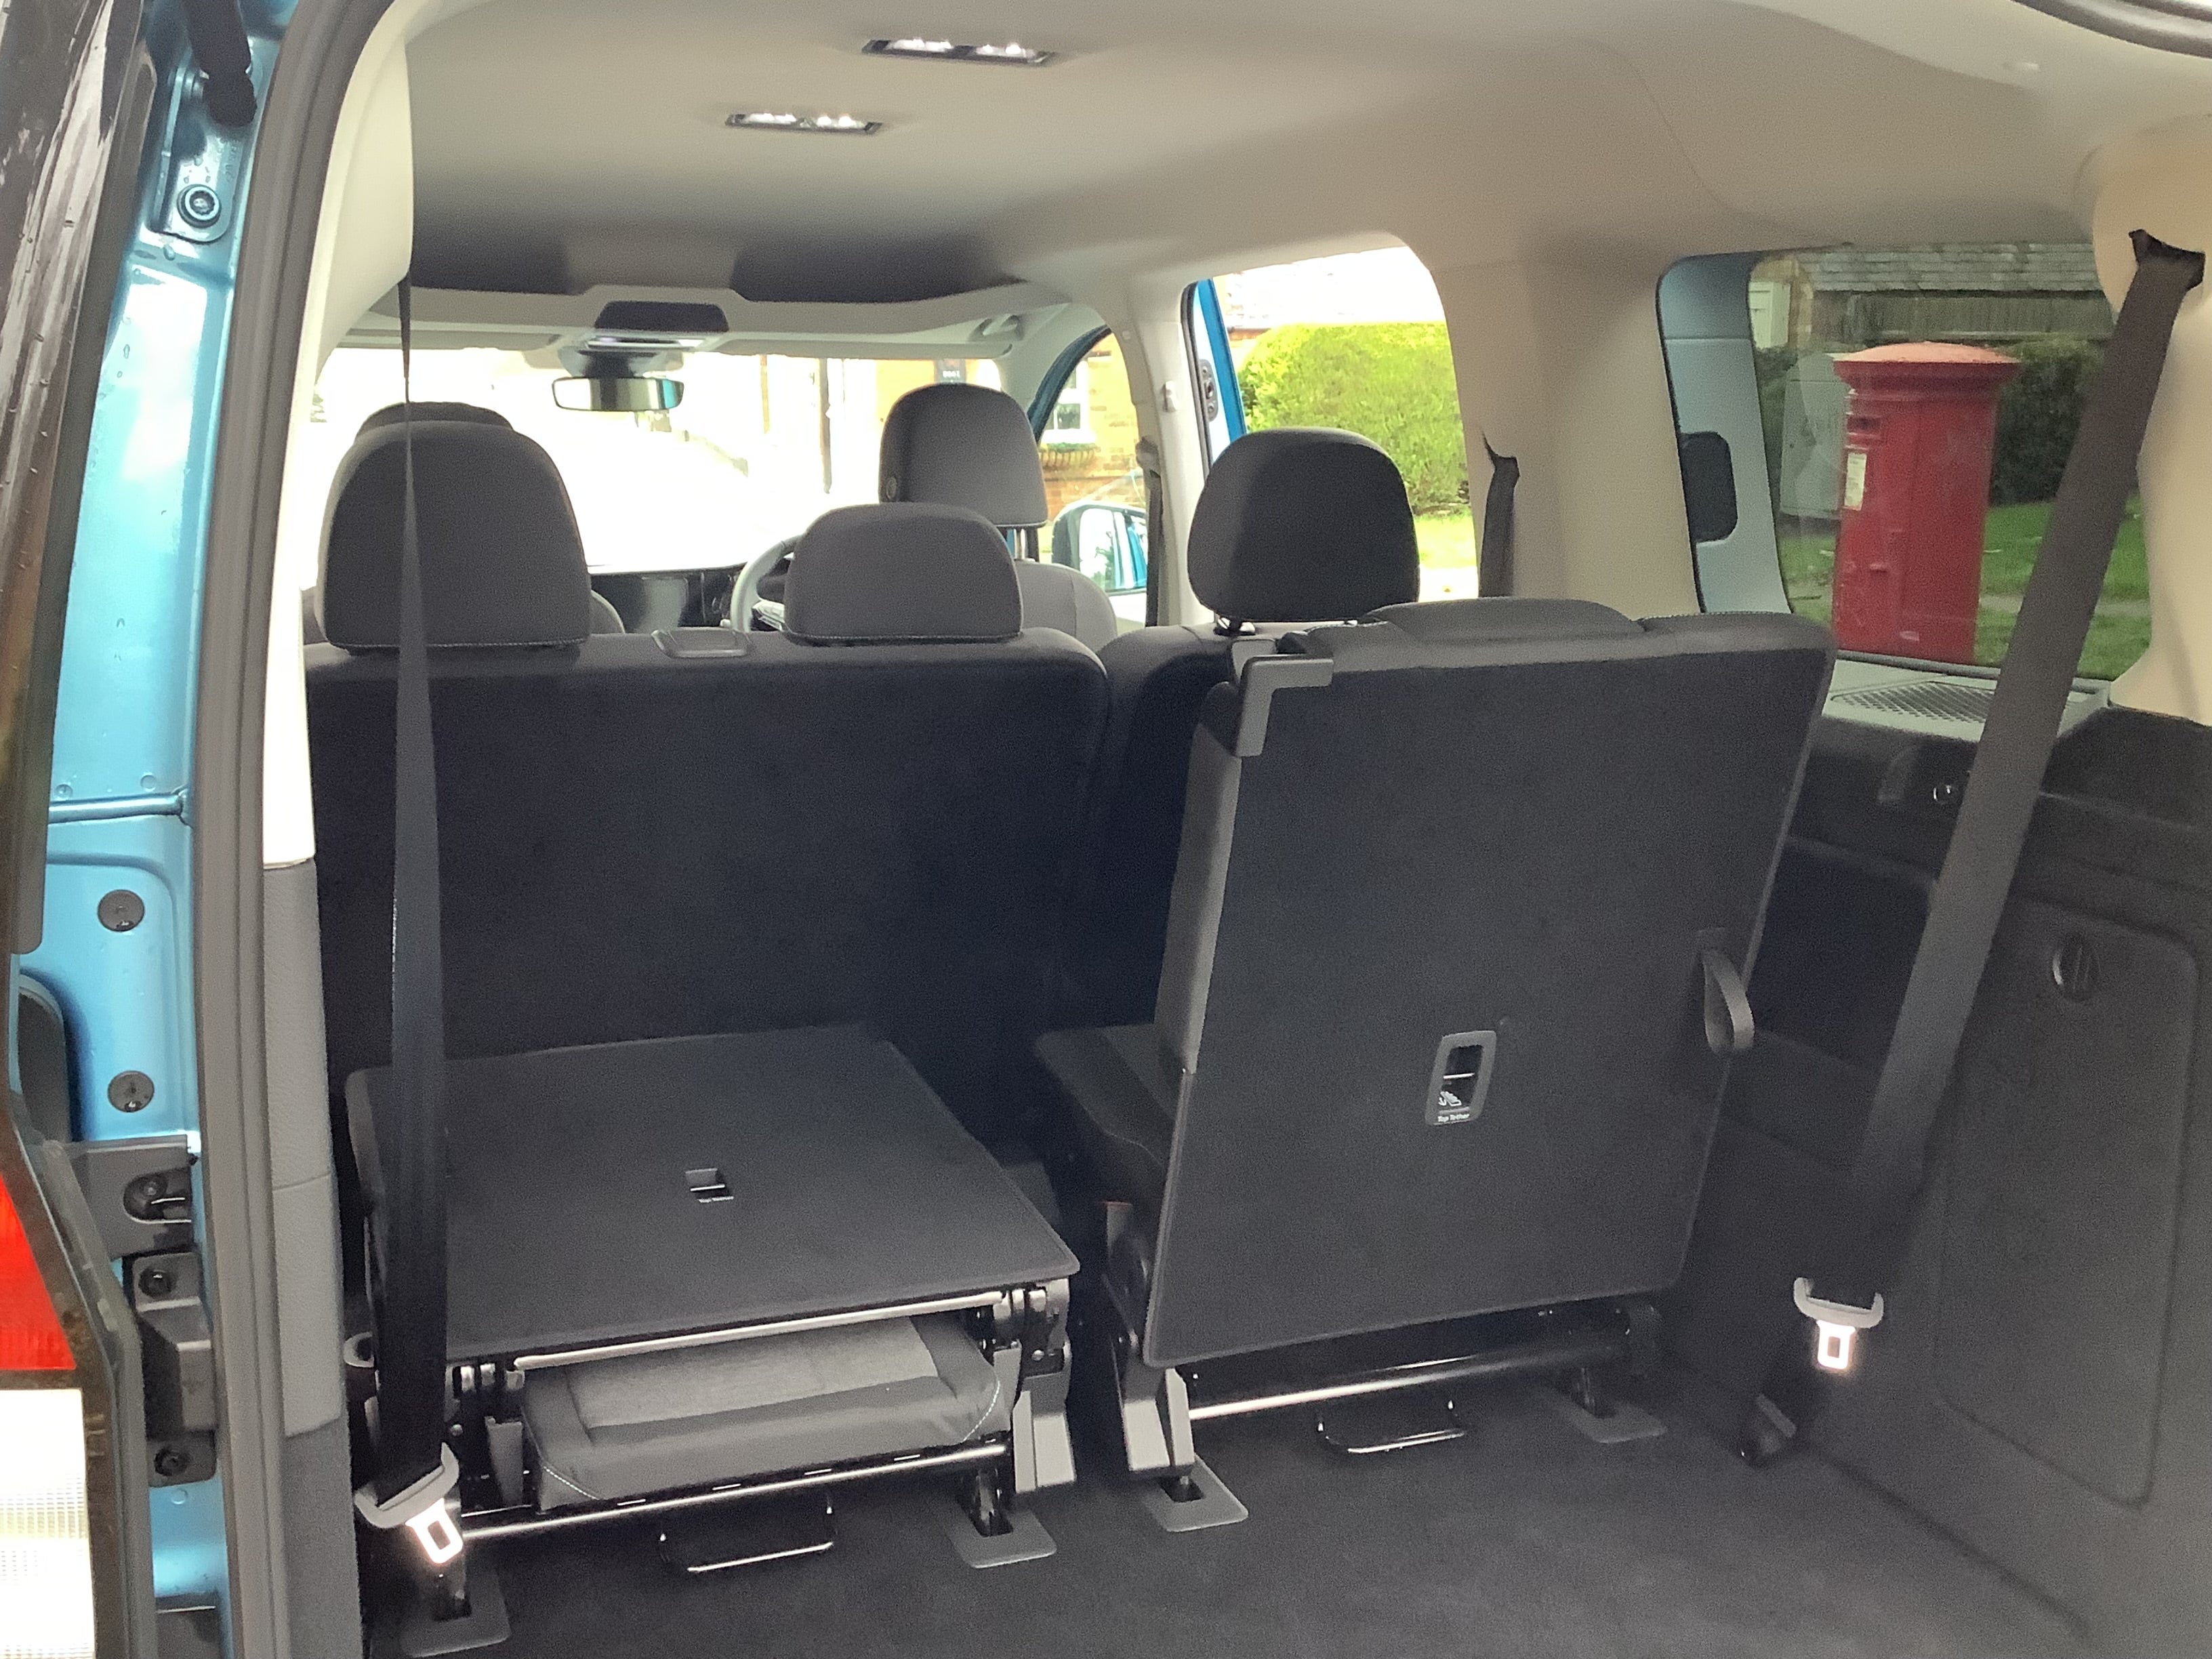 Ford Tourneo Connect: Extremely roomy and versatile